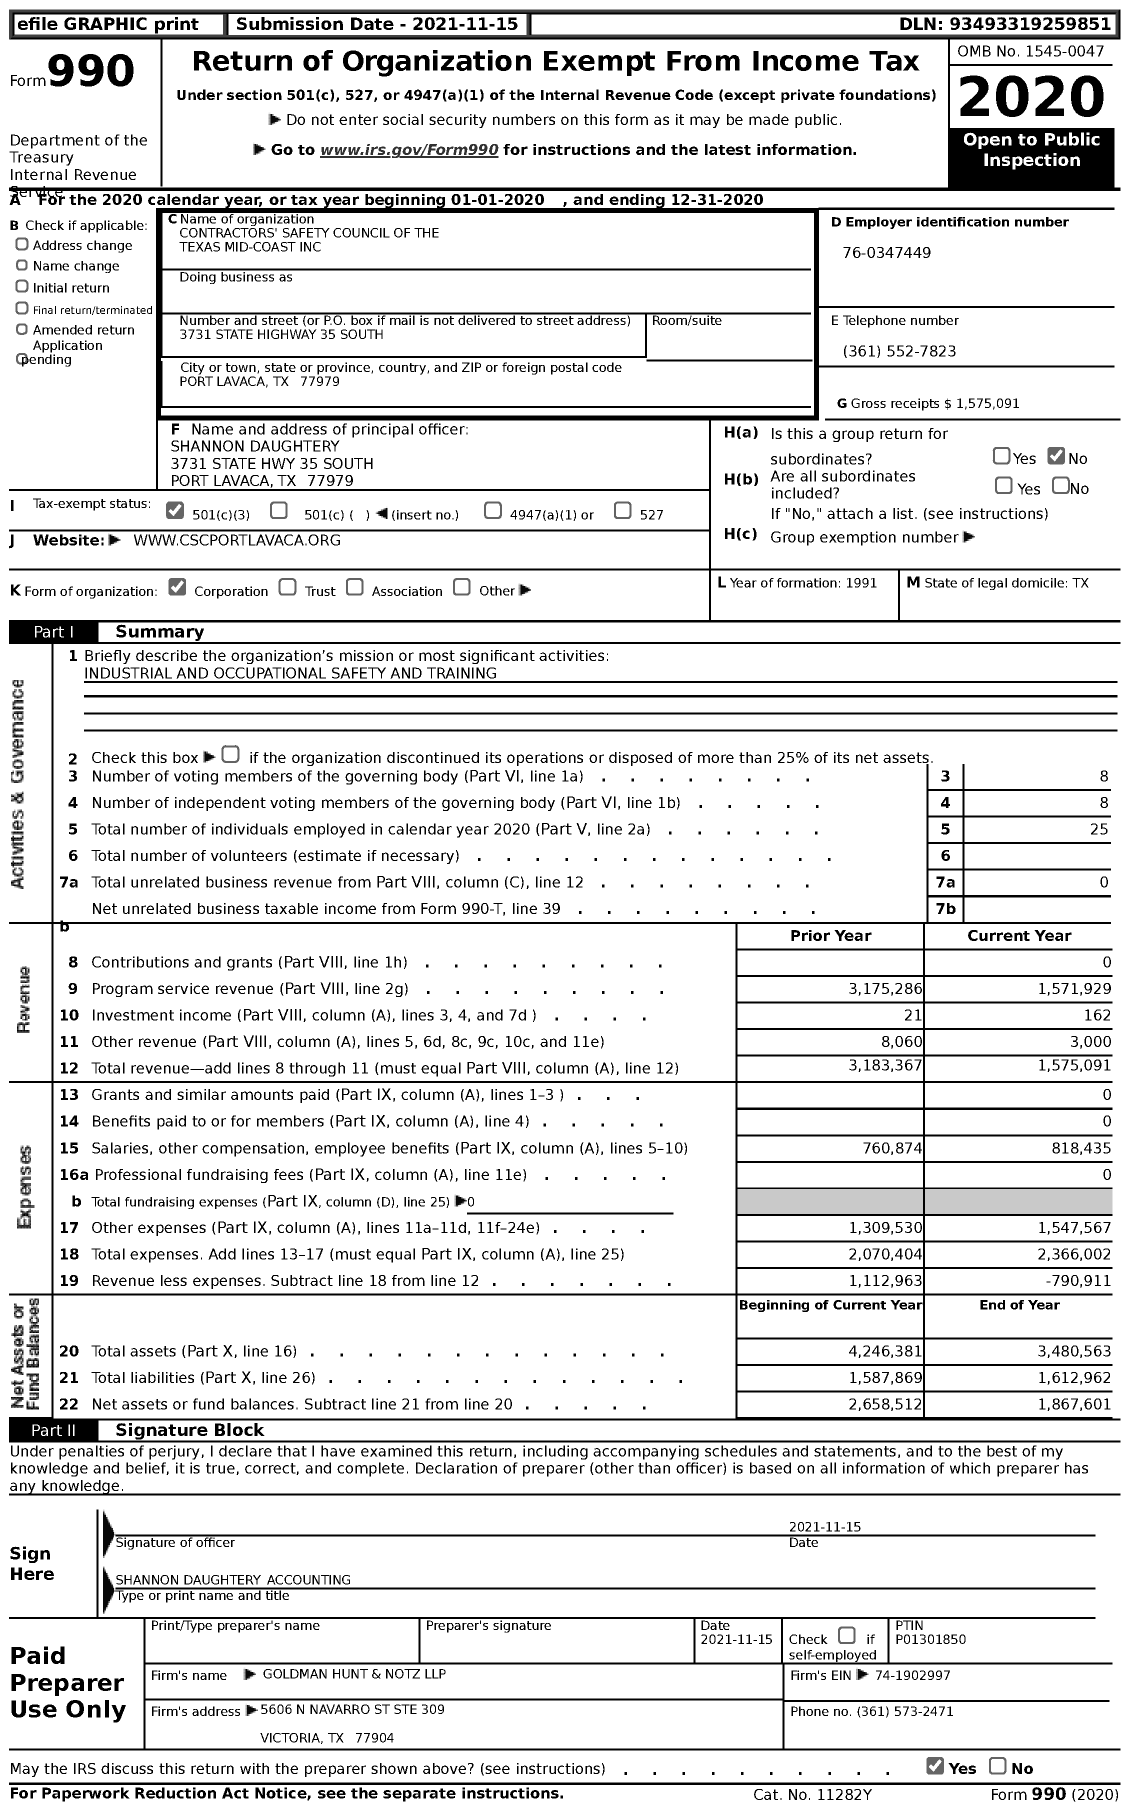 Image of first page of 2020 Form 990 for Contractors' Safety Council of the Texas Mid-Coast